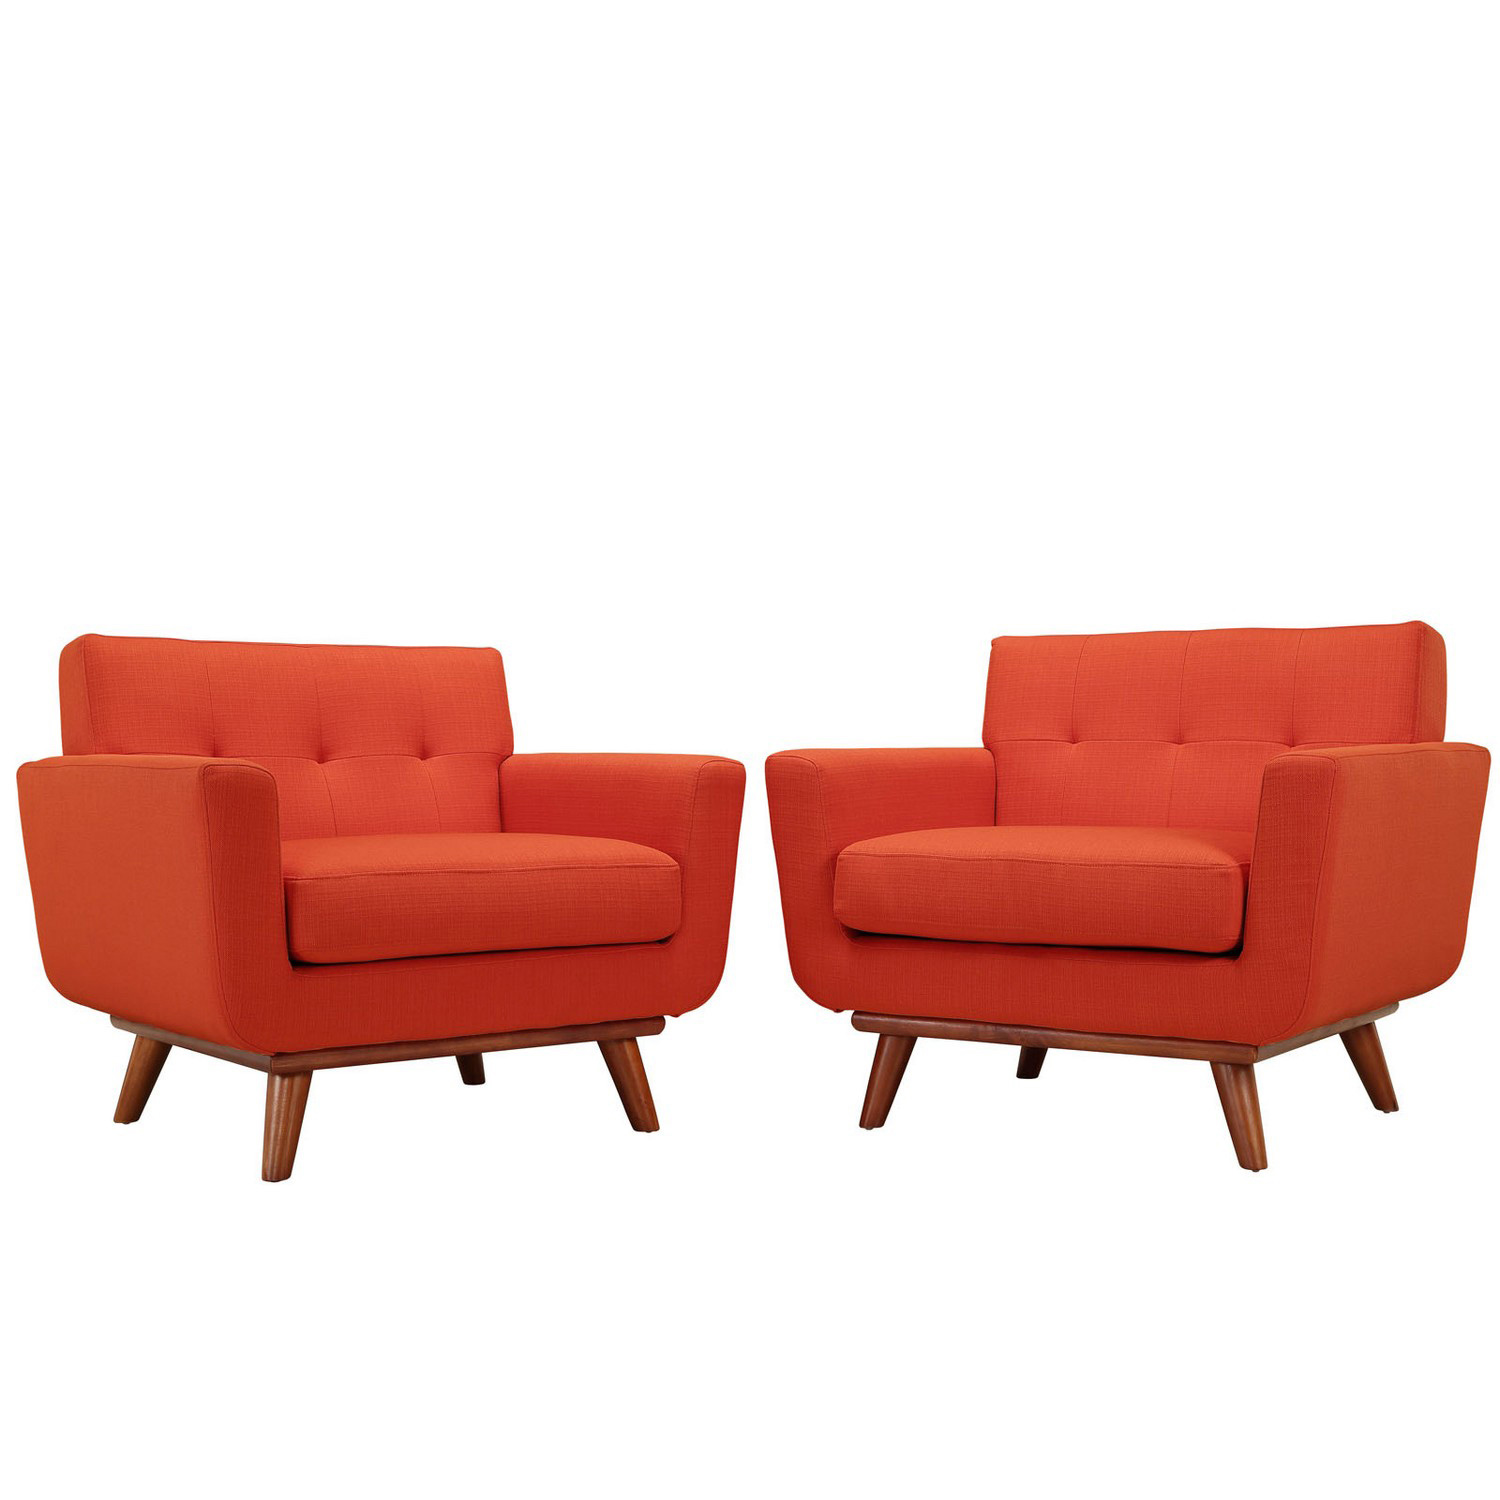 Modway Engage Armchair Wood Set of 2 - Atomic Red